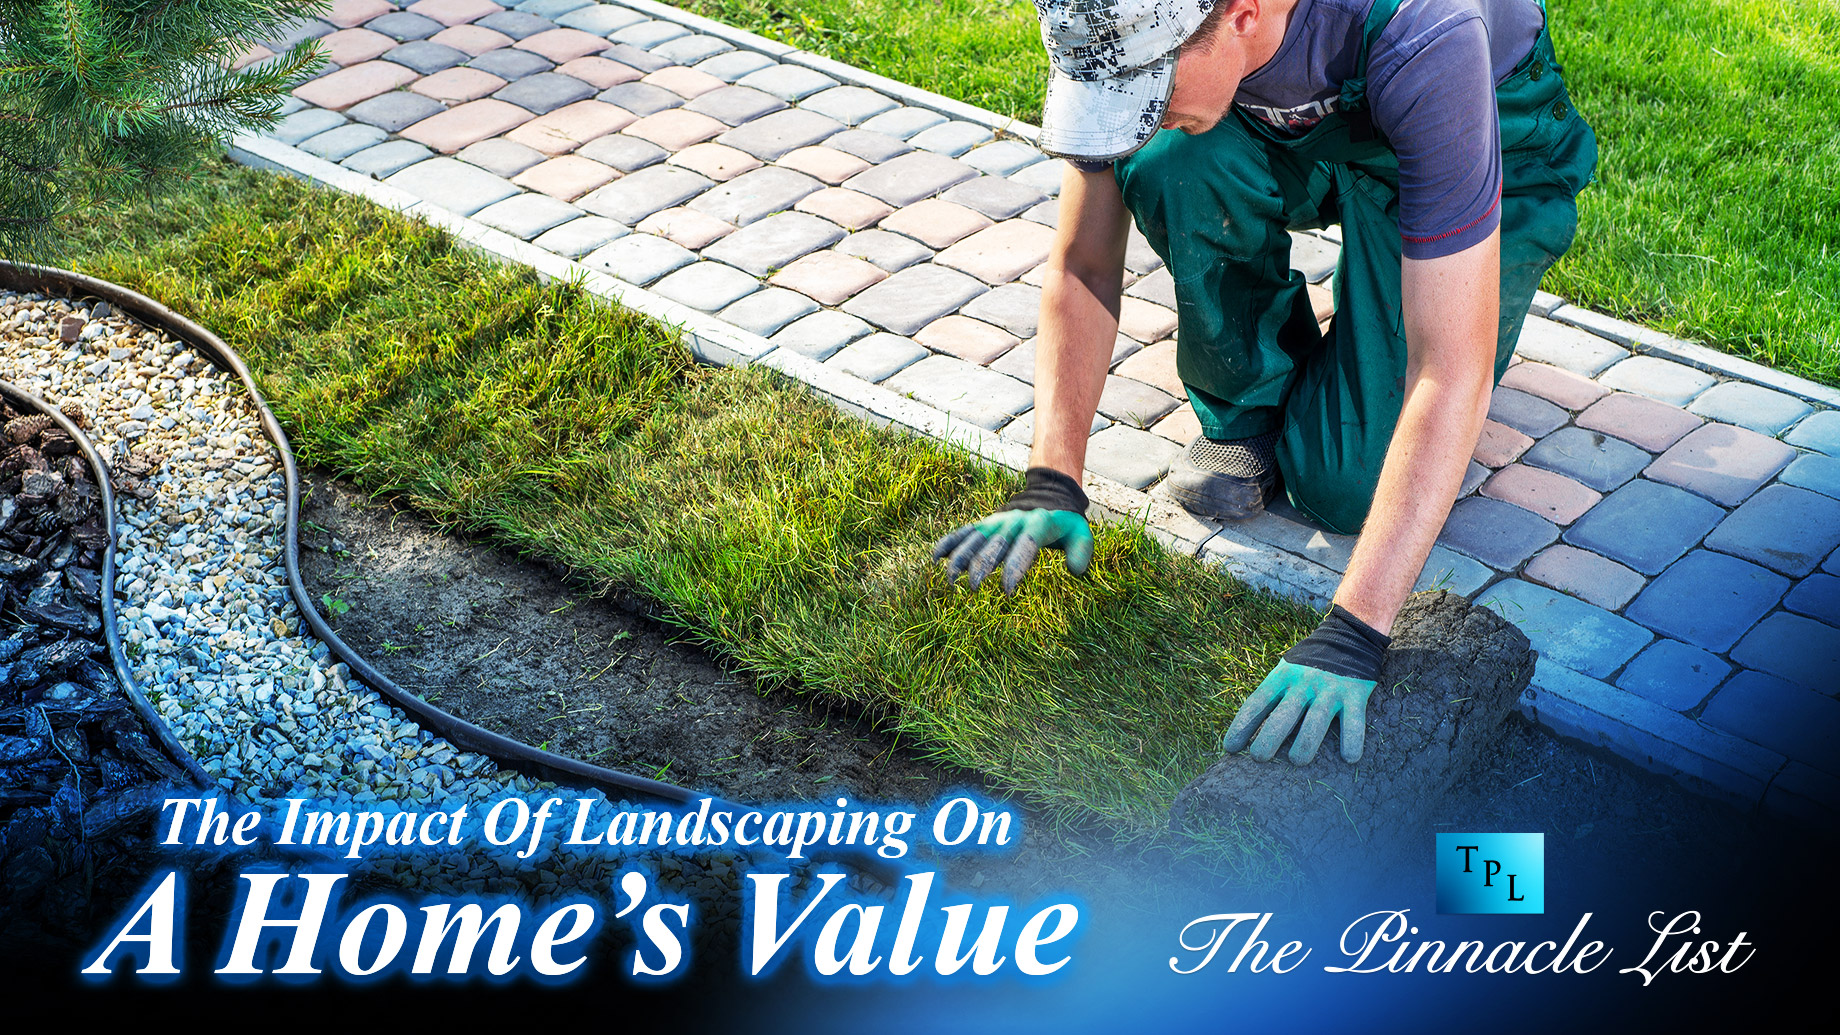 The Impact Of Landscaping On A Home's Value